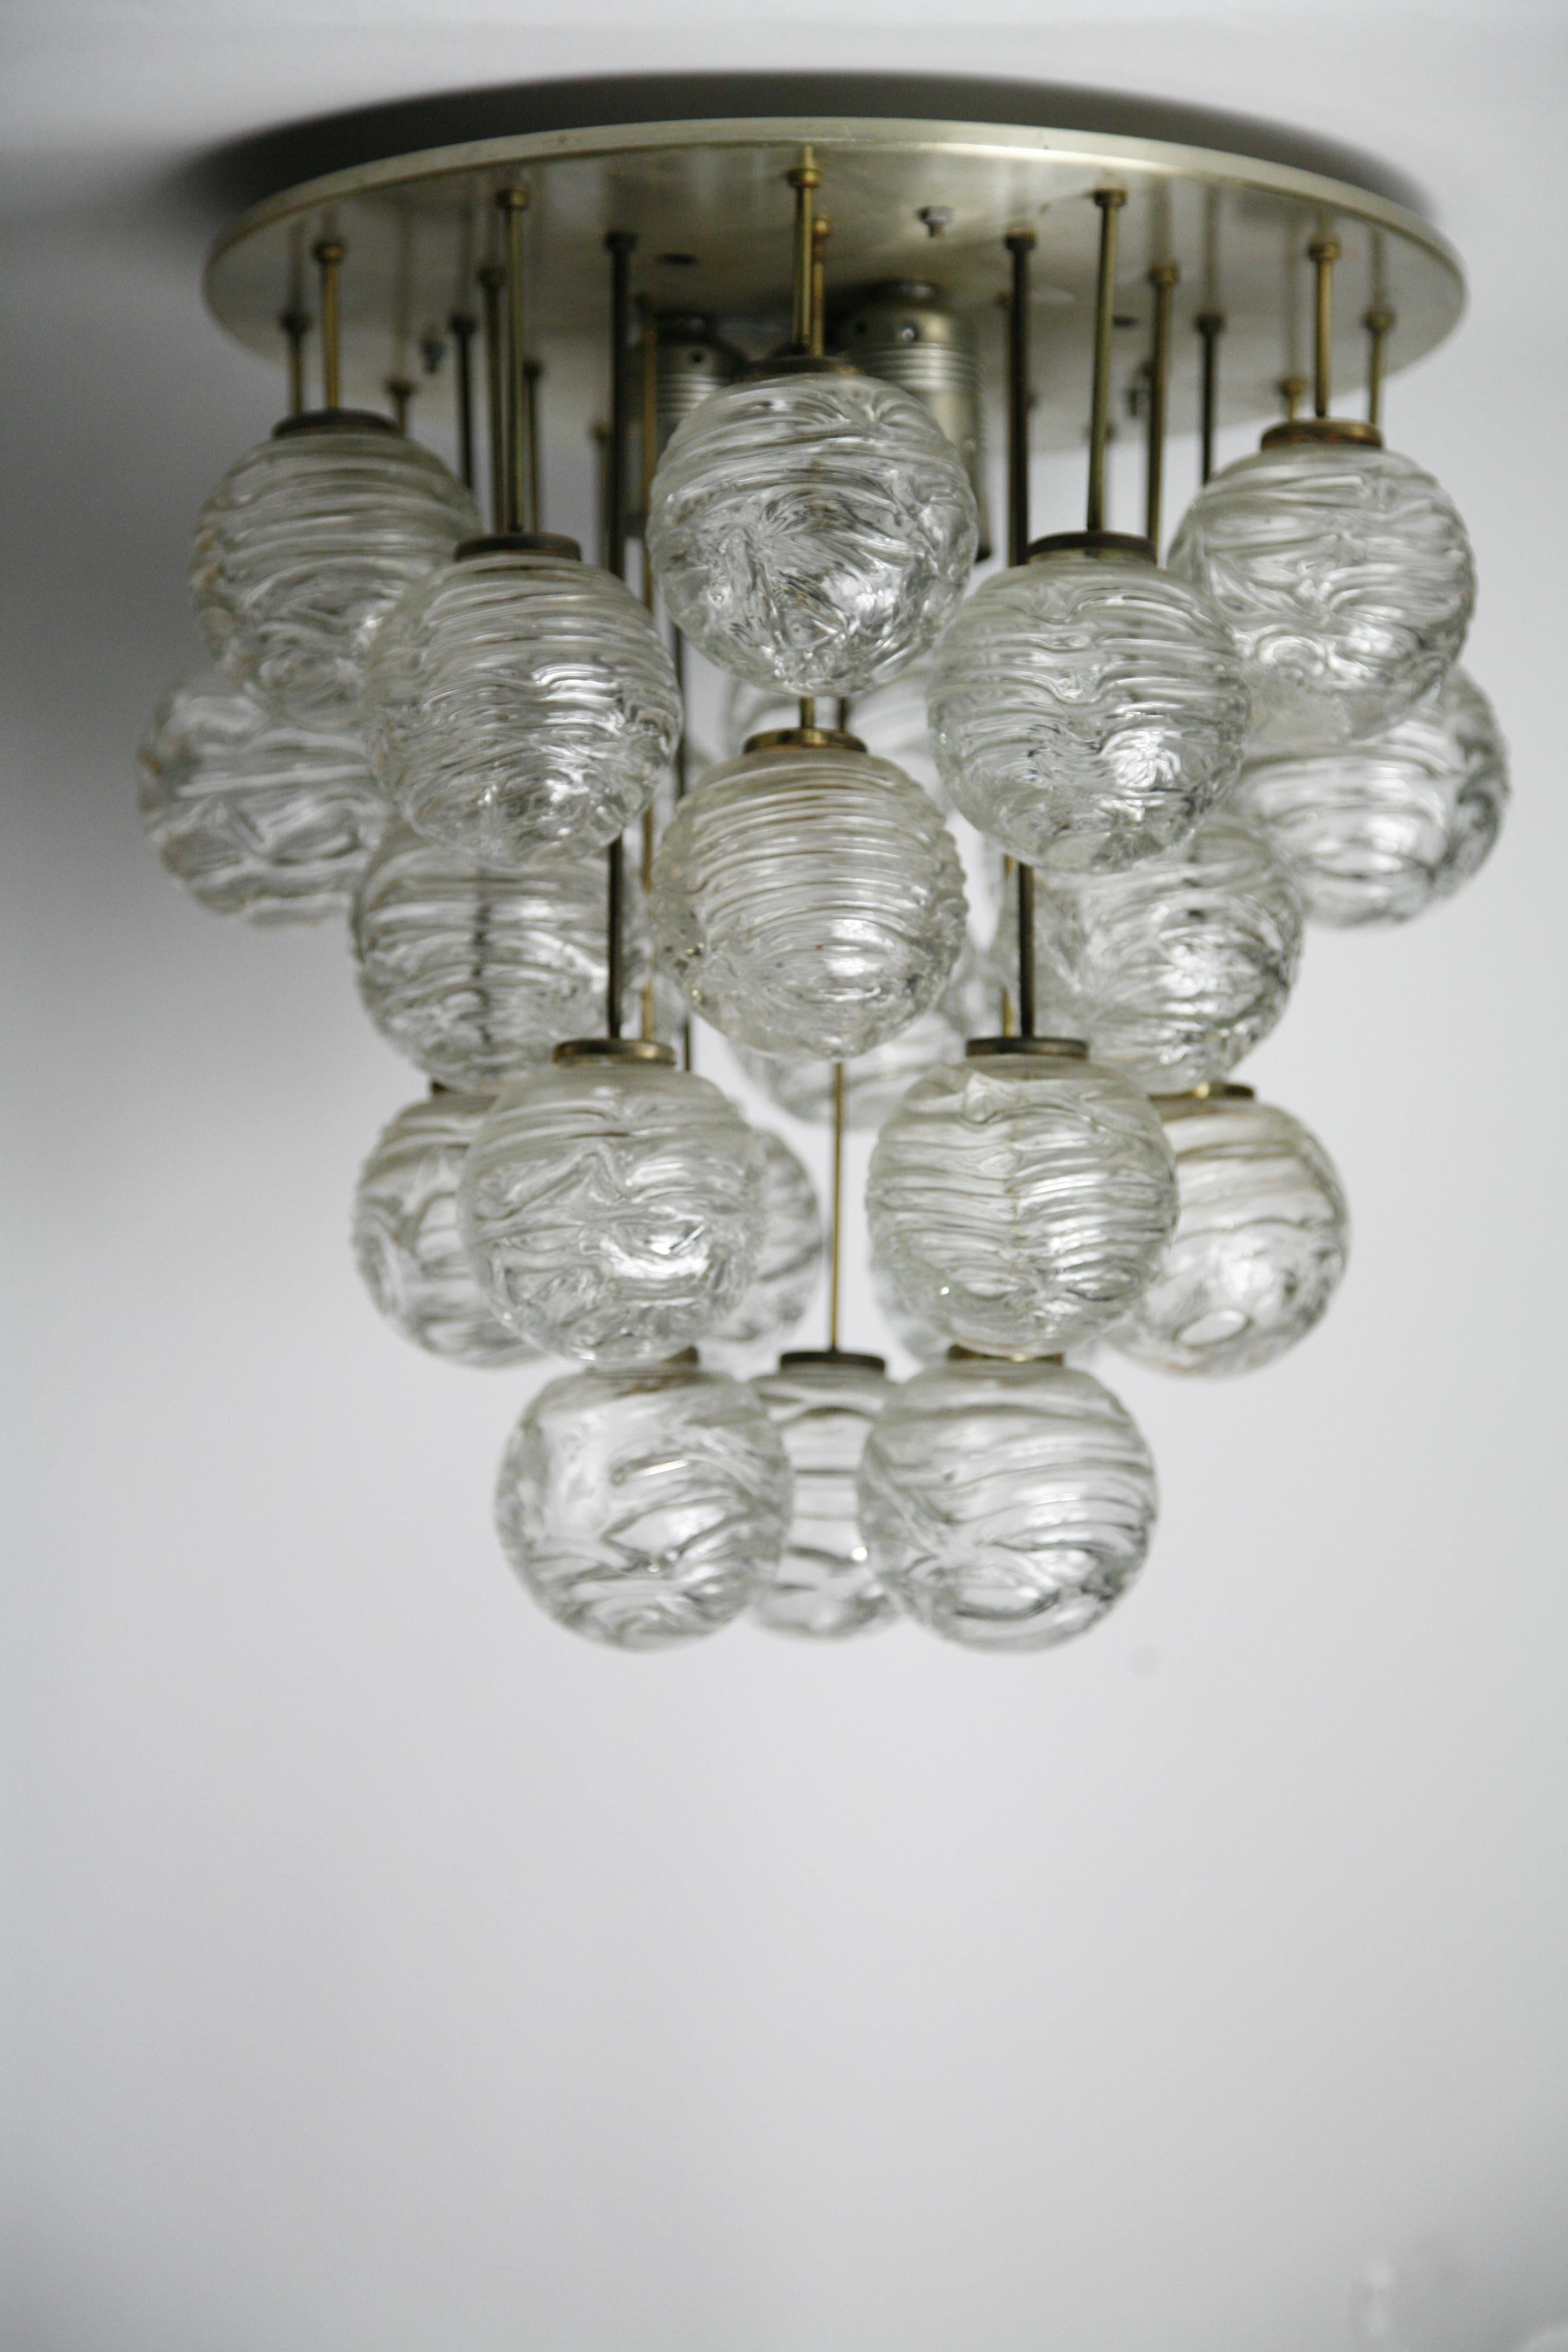 A Doria flushmount, aluminium frame with 26 individual handcrafted blown glass balls each on a single brass stem.
In the centre of the frame plate is five European sockets that will light up the glass balls, each individual glass ball has a pattern